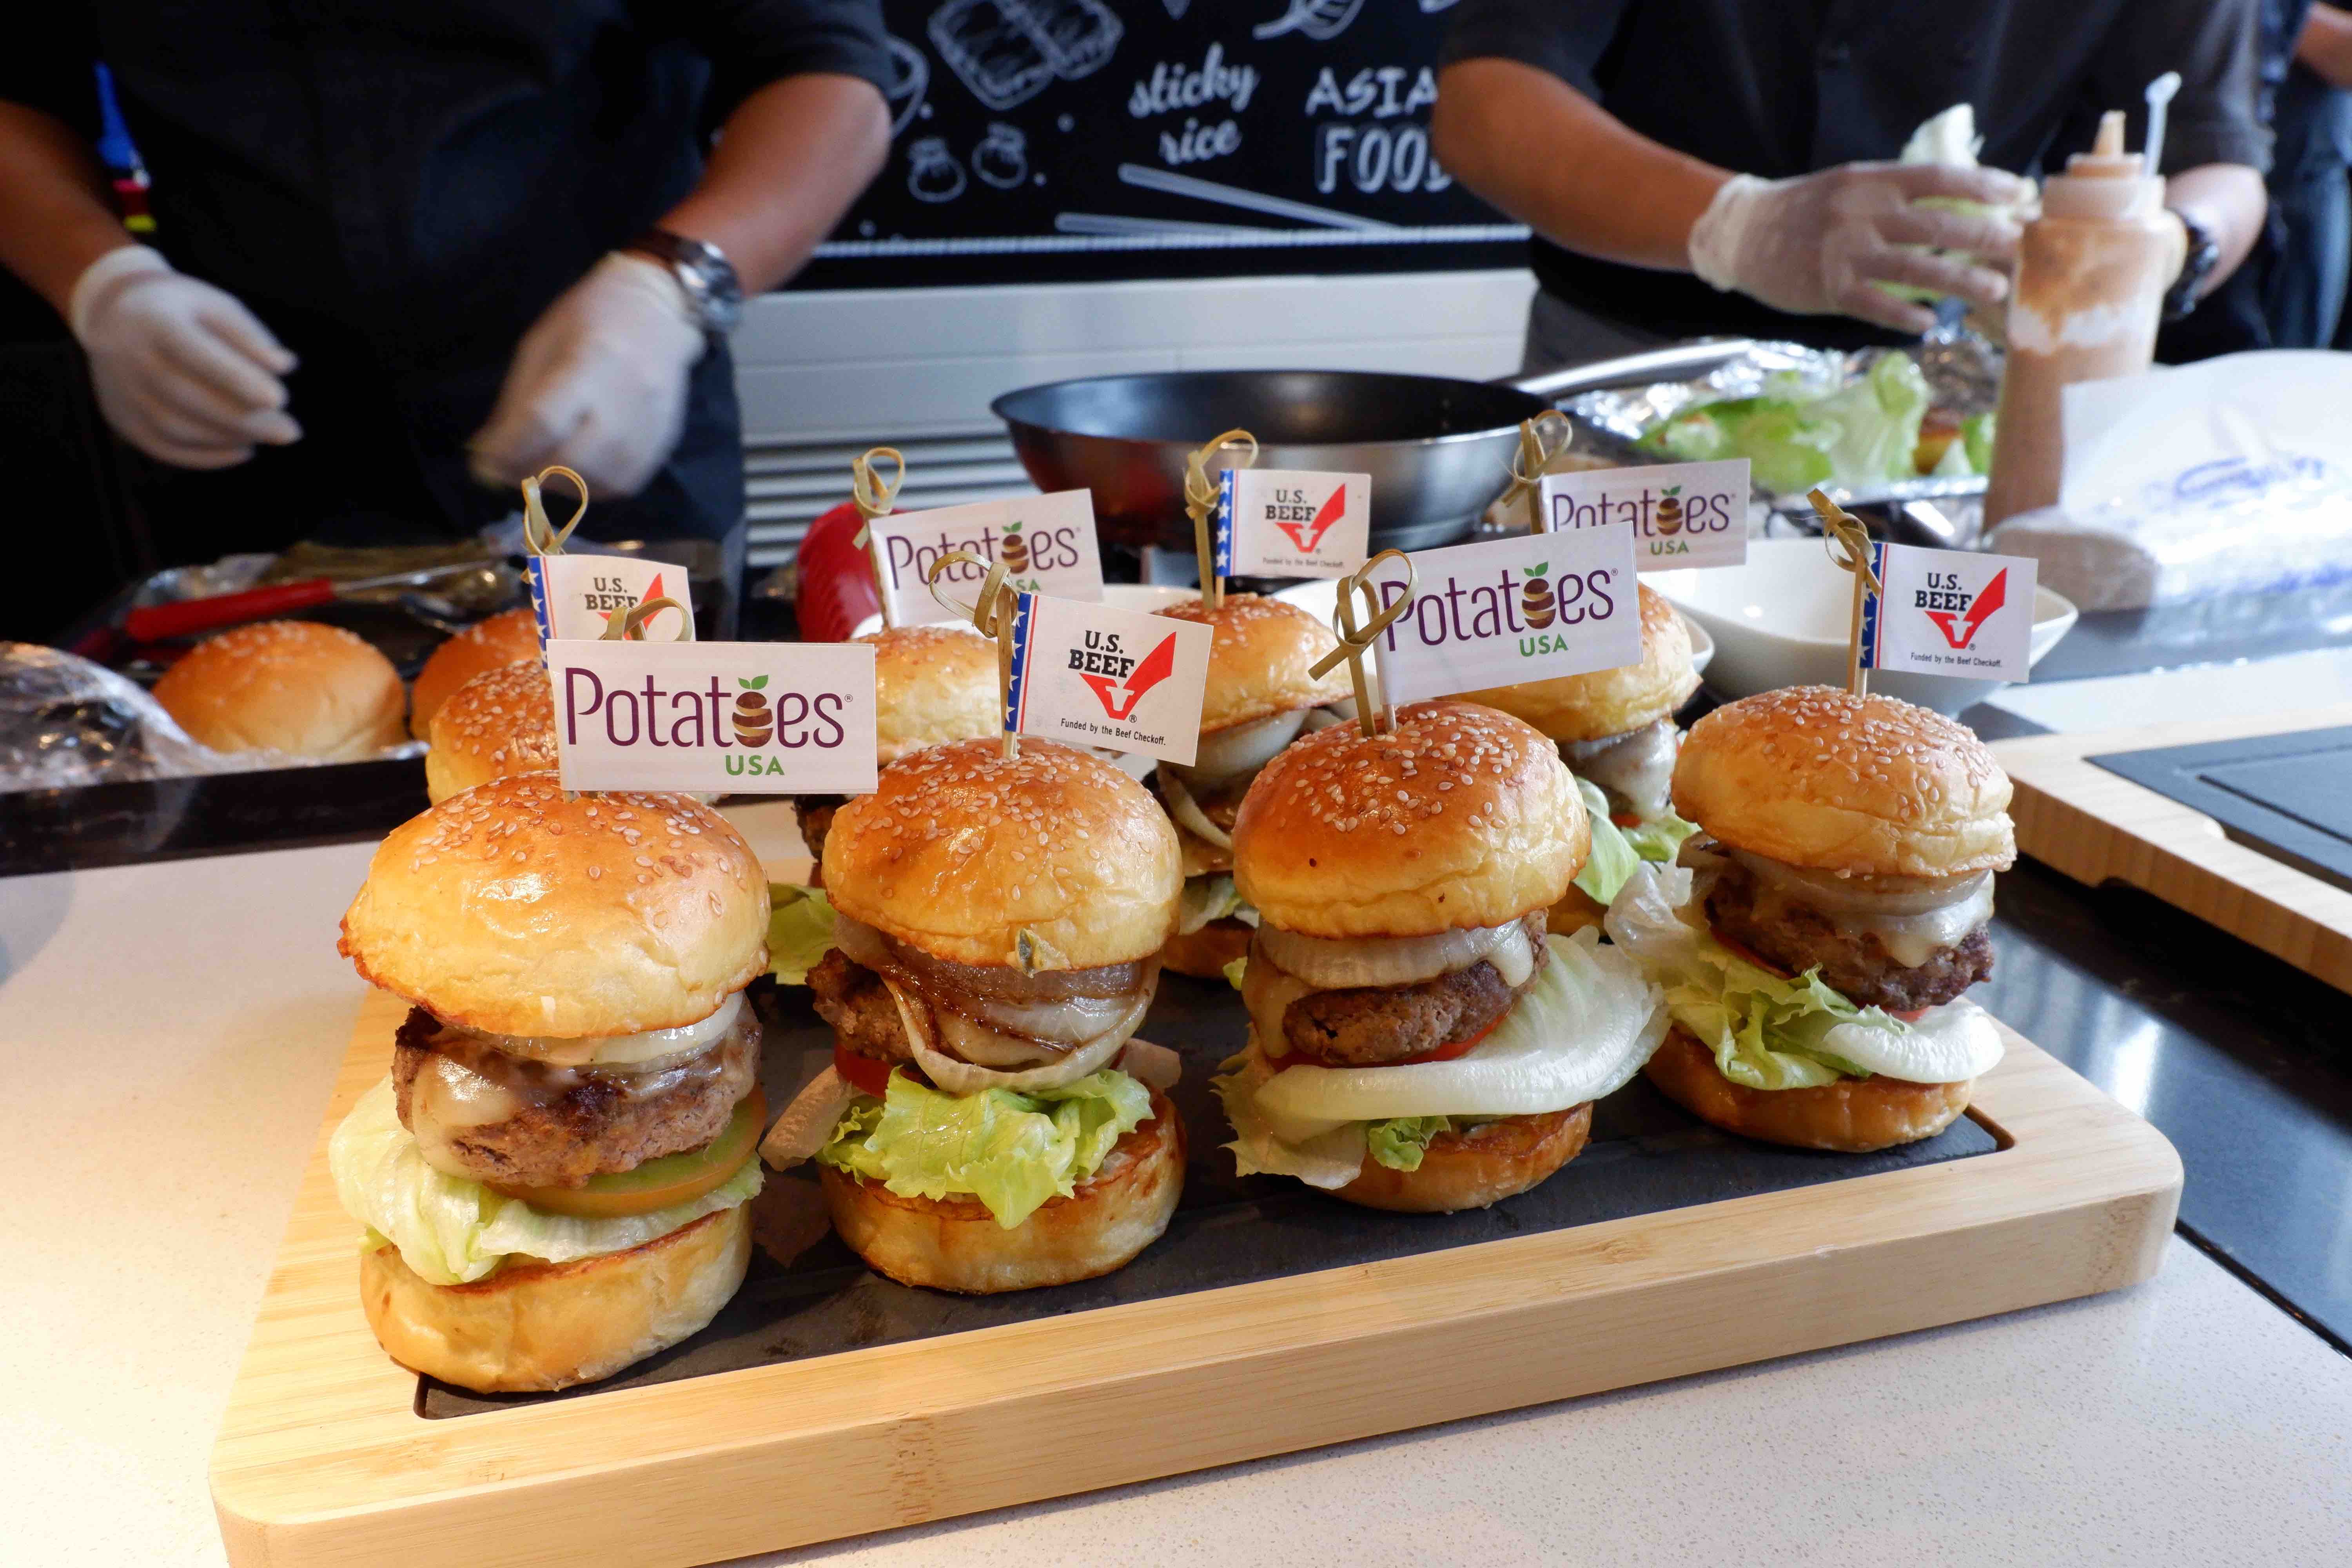 Chef Tristan Ngo's American classic burgers are created with rib eye beef, monterey jack, and cheddar cheese on homemade brioche buns. Photo: Linh To / Tuoi Tre News